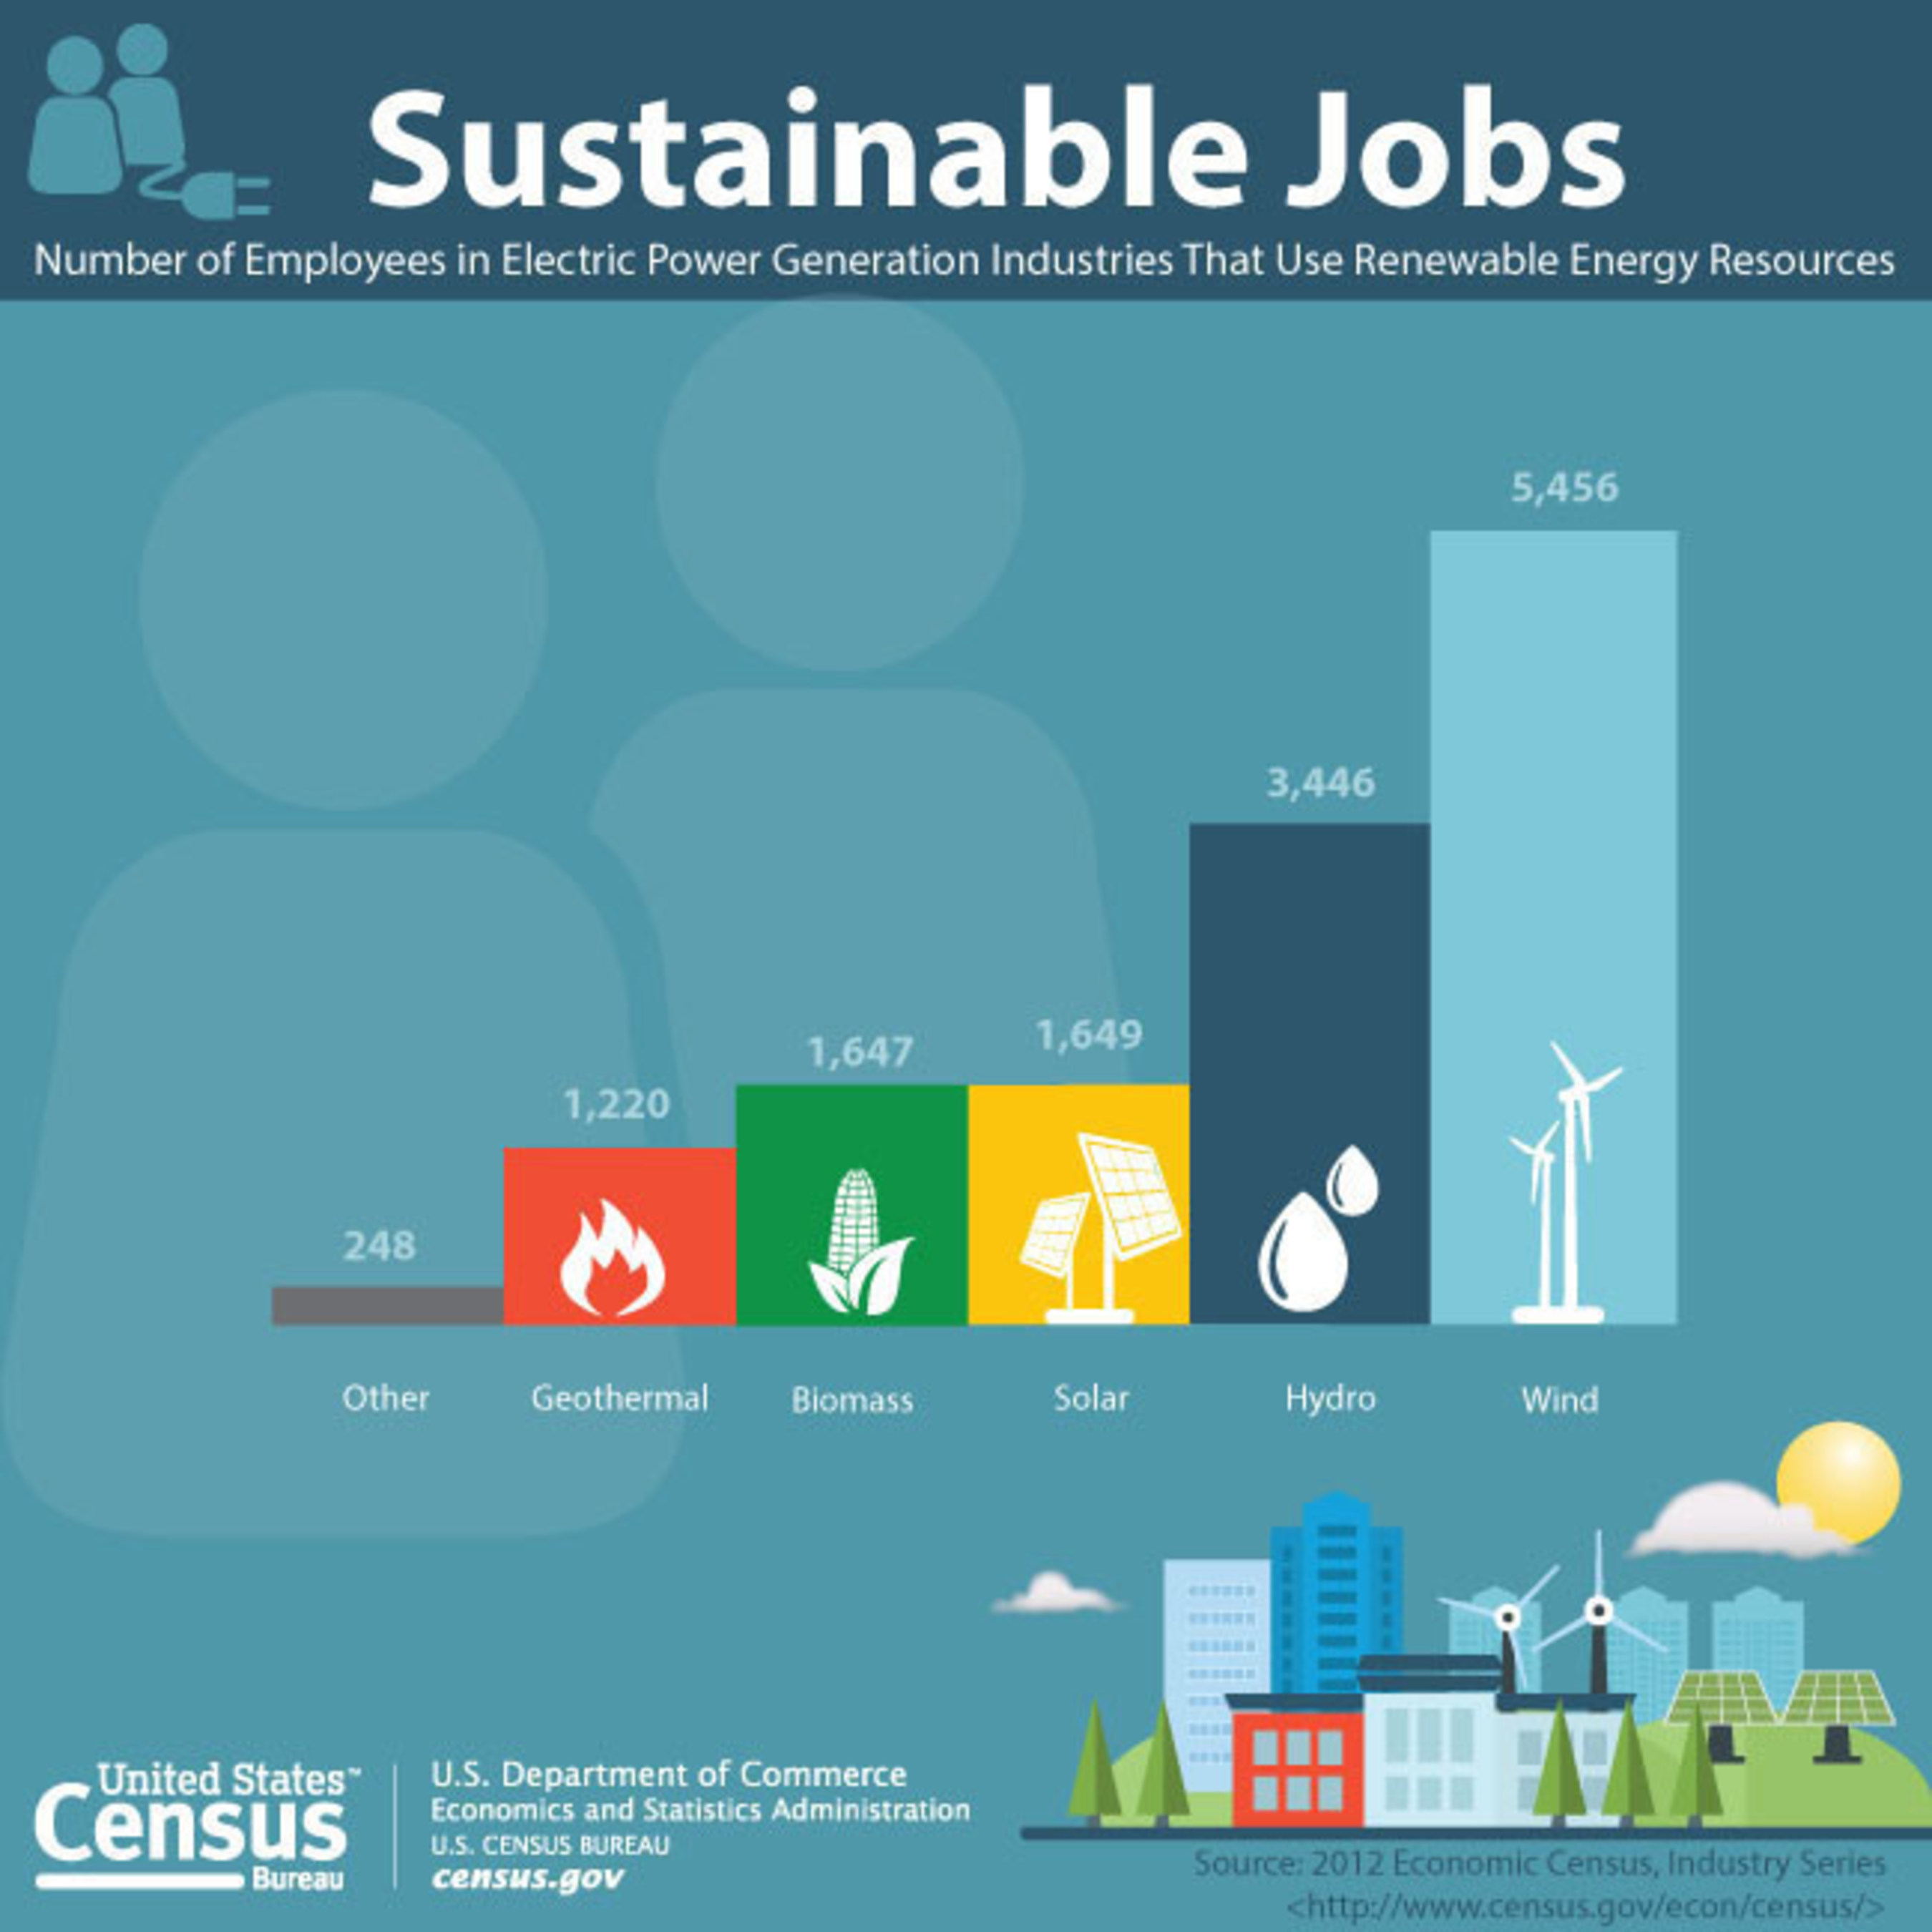 April 22, 2015, marks the 45th anniversary of Earth Day - a day intended to inspire awareness and appreciation for the Earth's natural environment. In honor of Earth Day, and Earth Week (April 16-22), this edition of Profile America Facts for Features includes examples of Census Bureau statistics pertaining to energy and the environment.